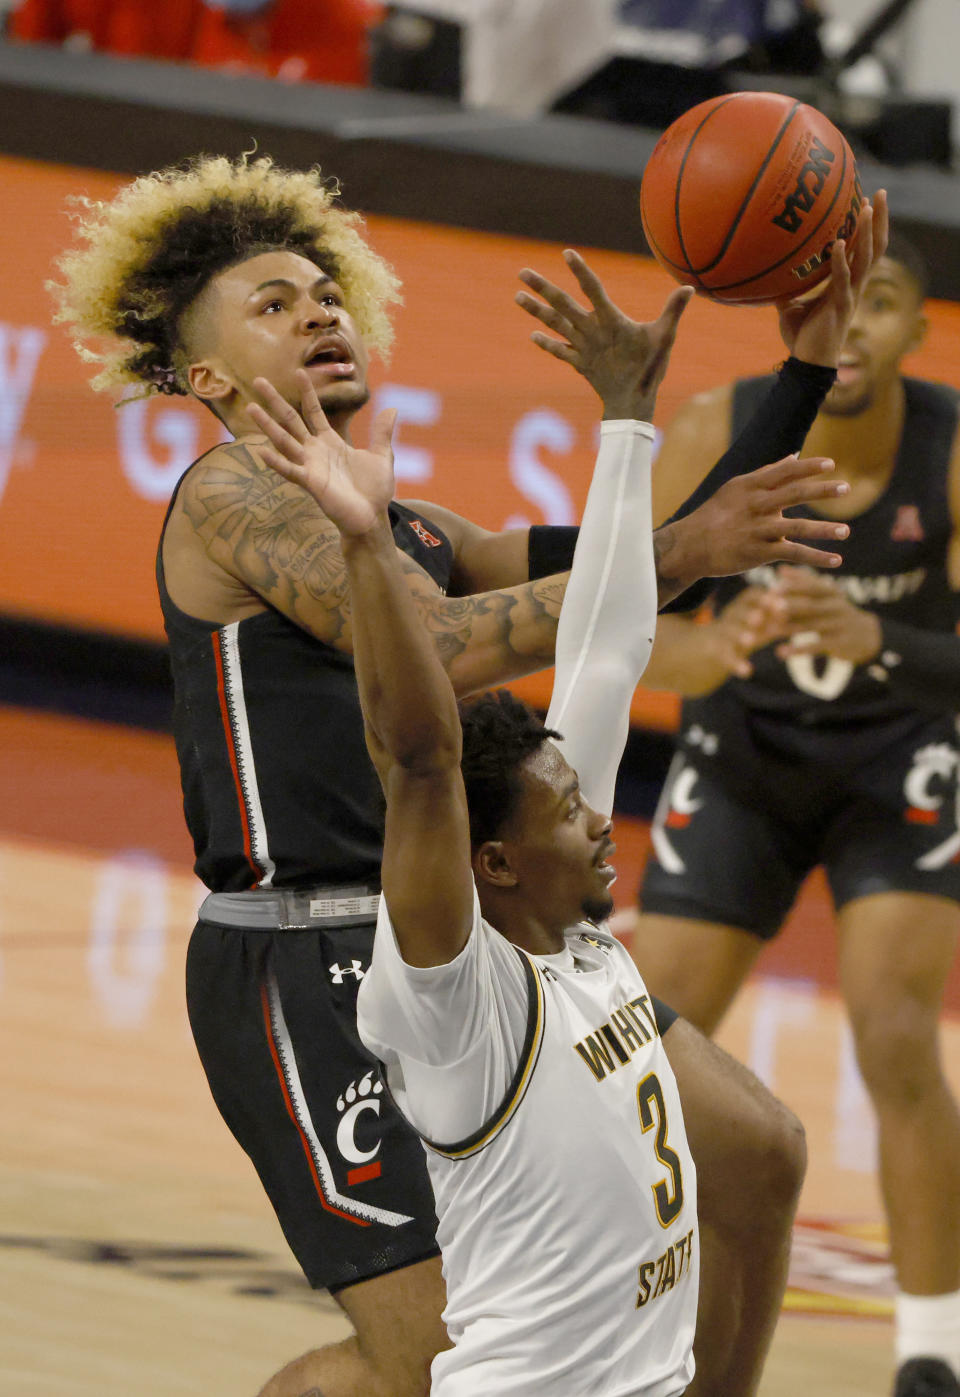 Cincinnati guard Mike Saunders (3) goes up for a shot as Wichita State guard Alterique Gilbert (3) defends during the first half of an NCAA college basketball game in the semifinal round of the American Athletic Conference men's tournament Saturday, March 13, 2021, in Fort Worth, Texas. (AP Photo/Ron Jenkins)